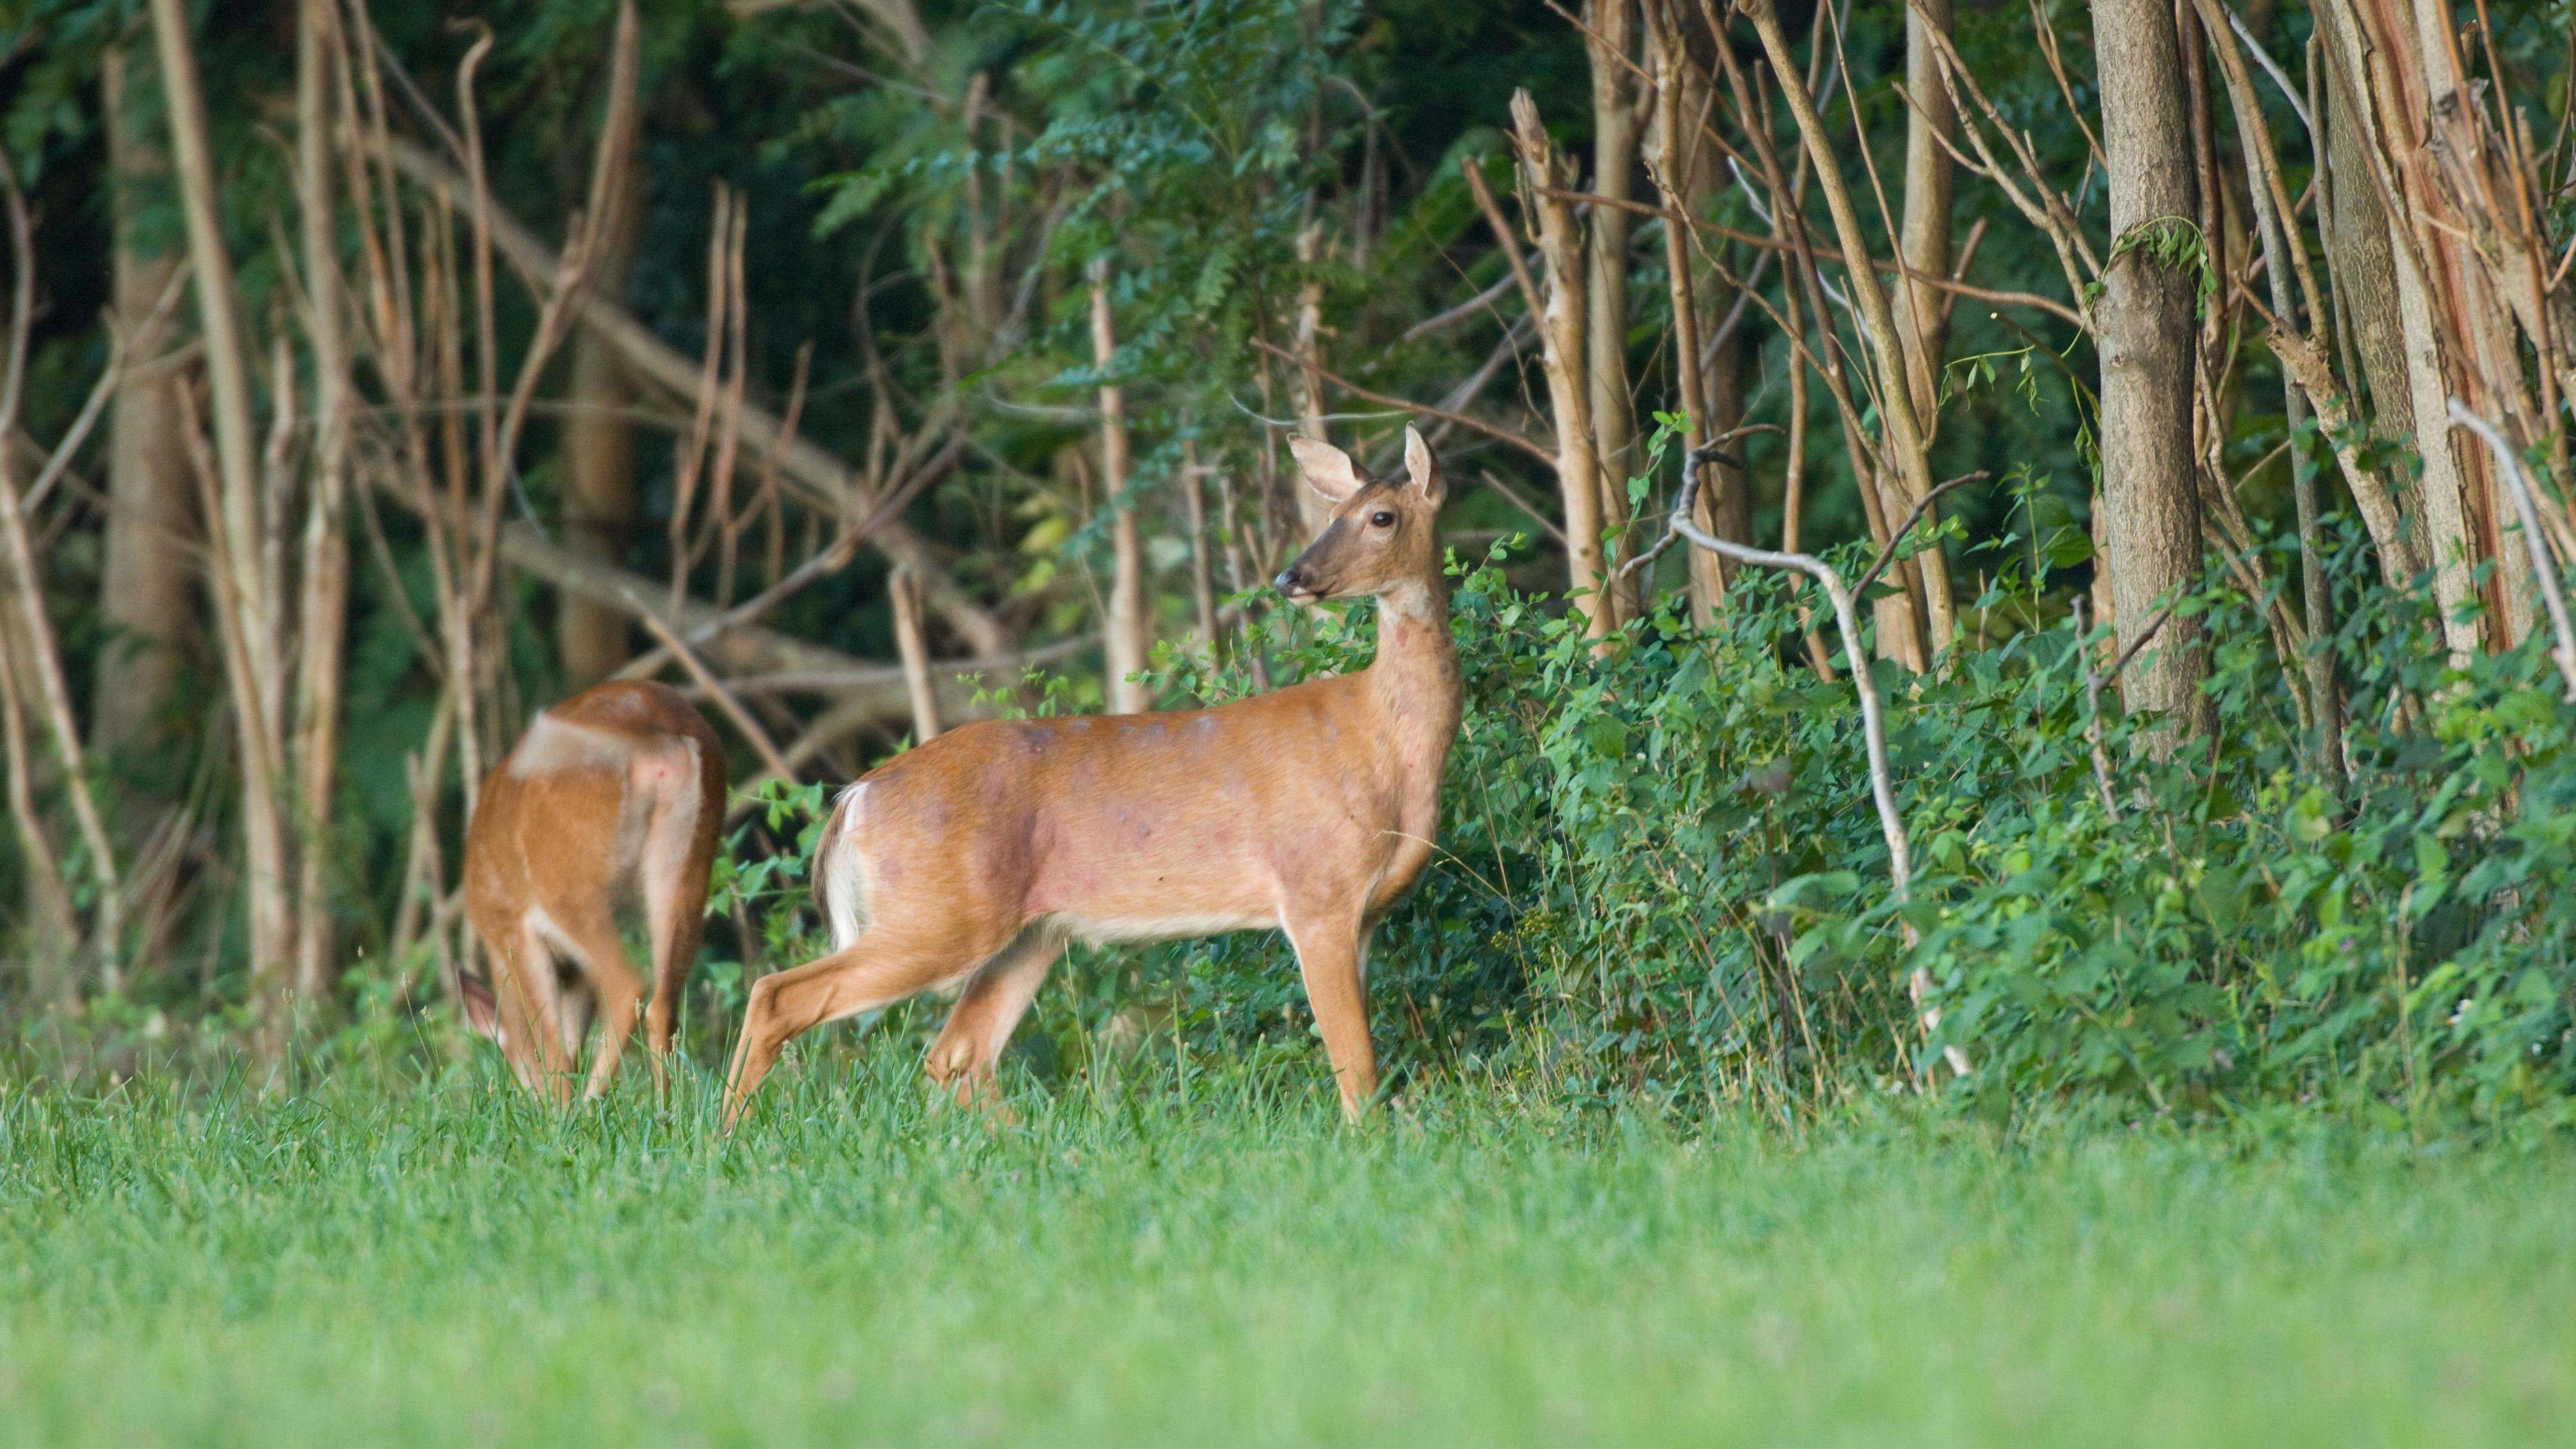 White-tailed deer standing at the edge of a grassy, tree-lined field.